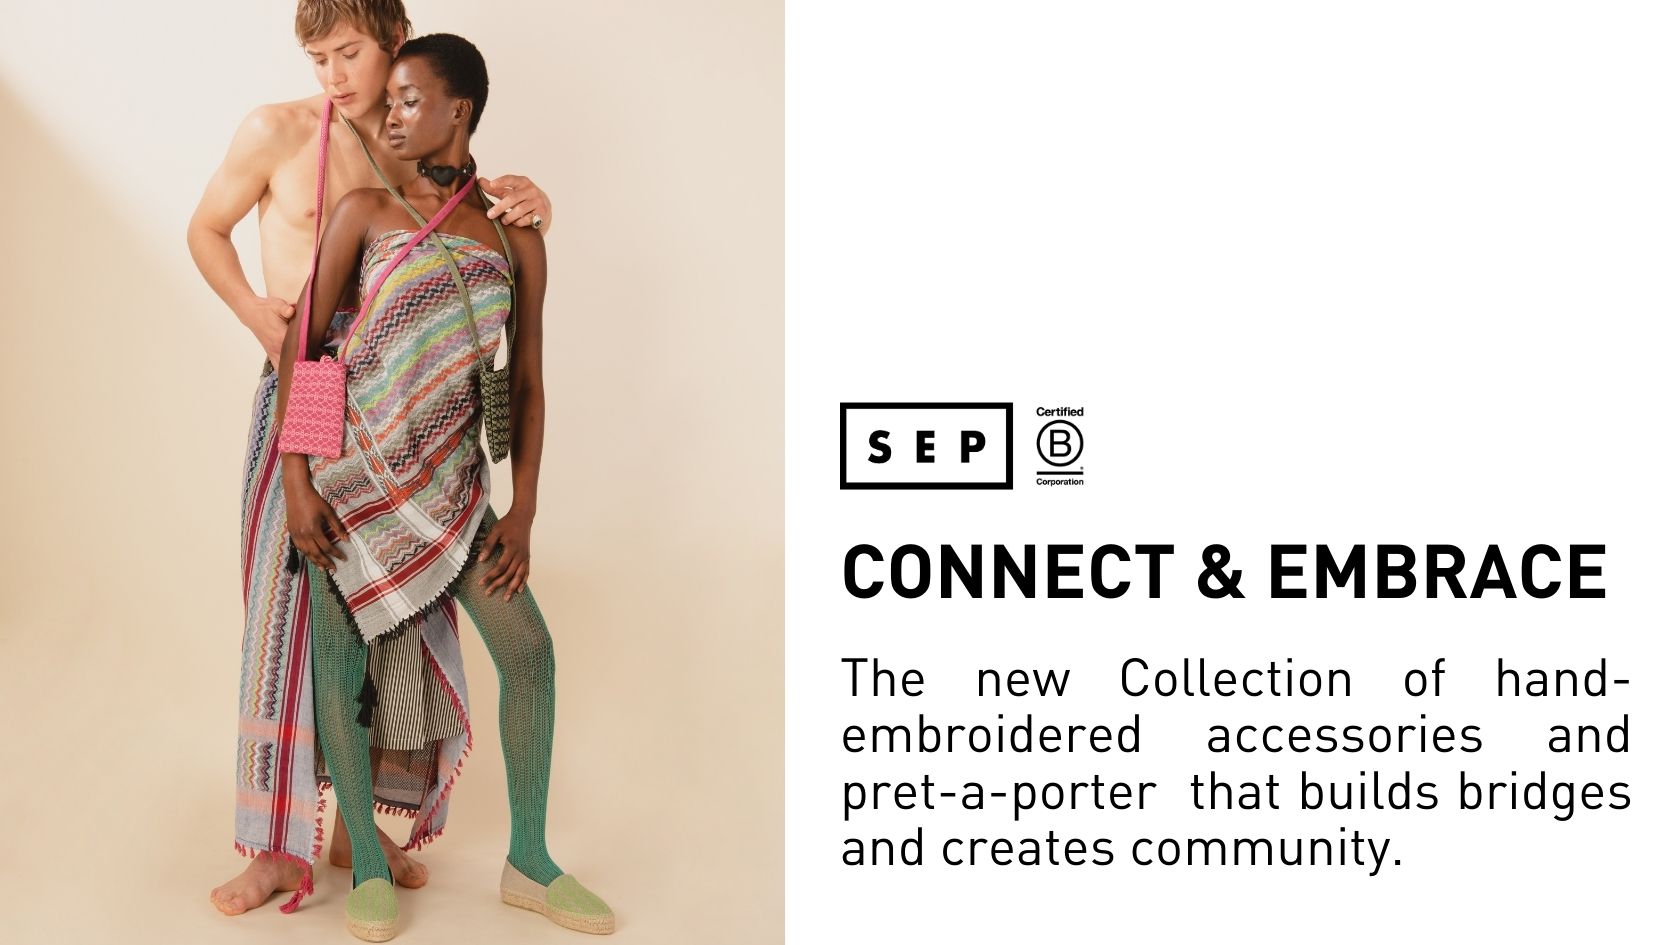 CONNECT & EMBRACE The new Collection of hand-embroidered accessories and pret-a-porter  that builds bridges and creates community.